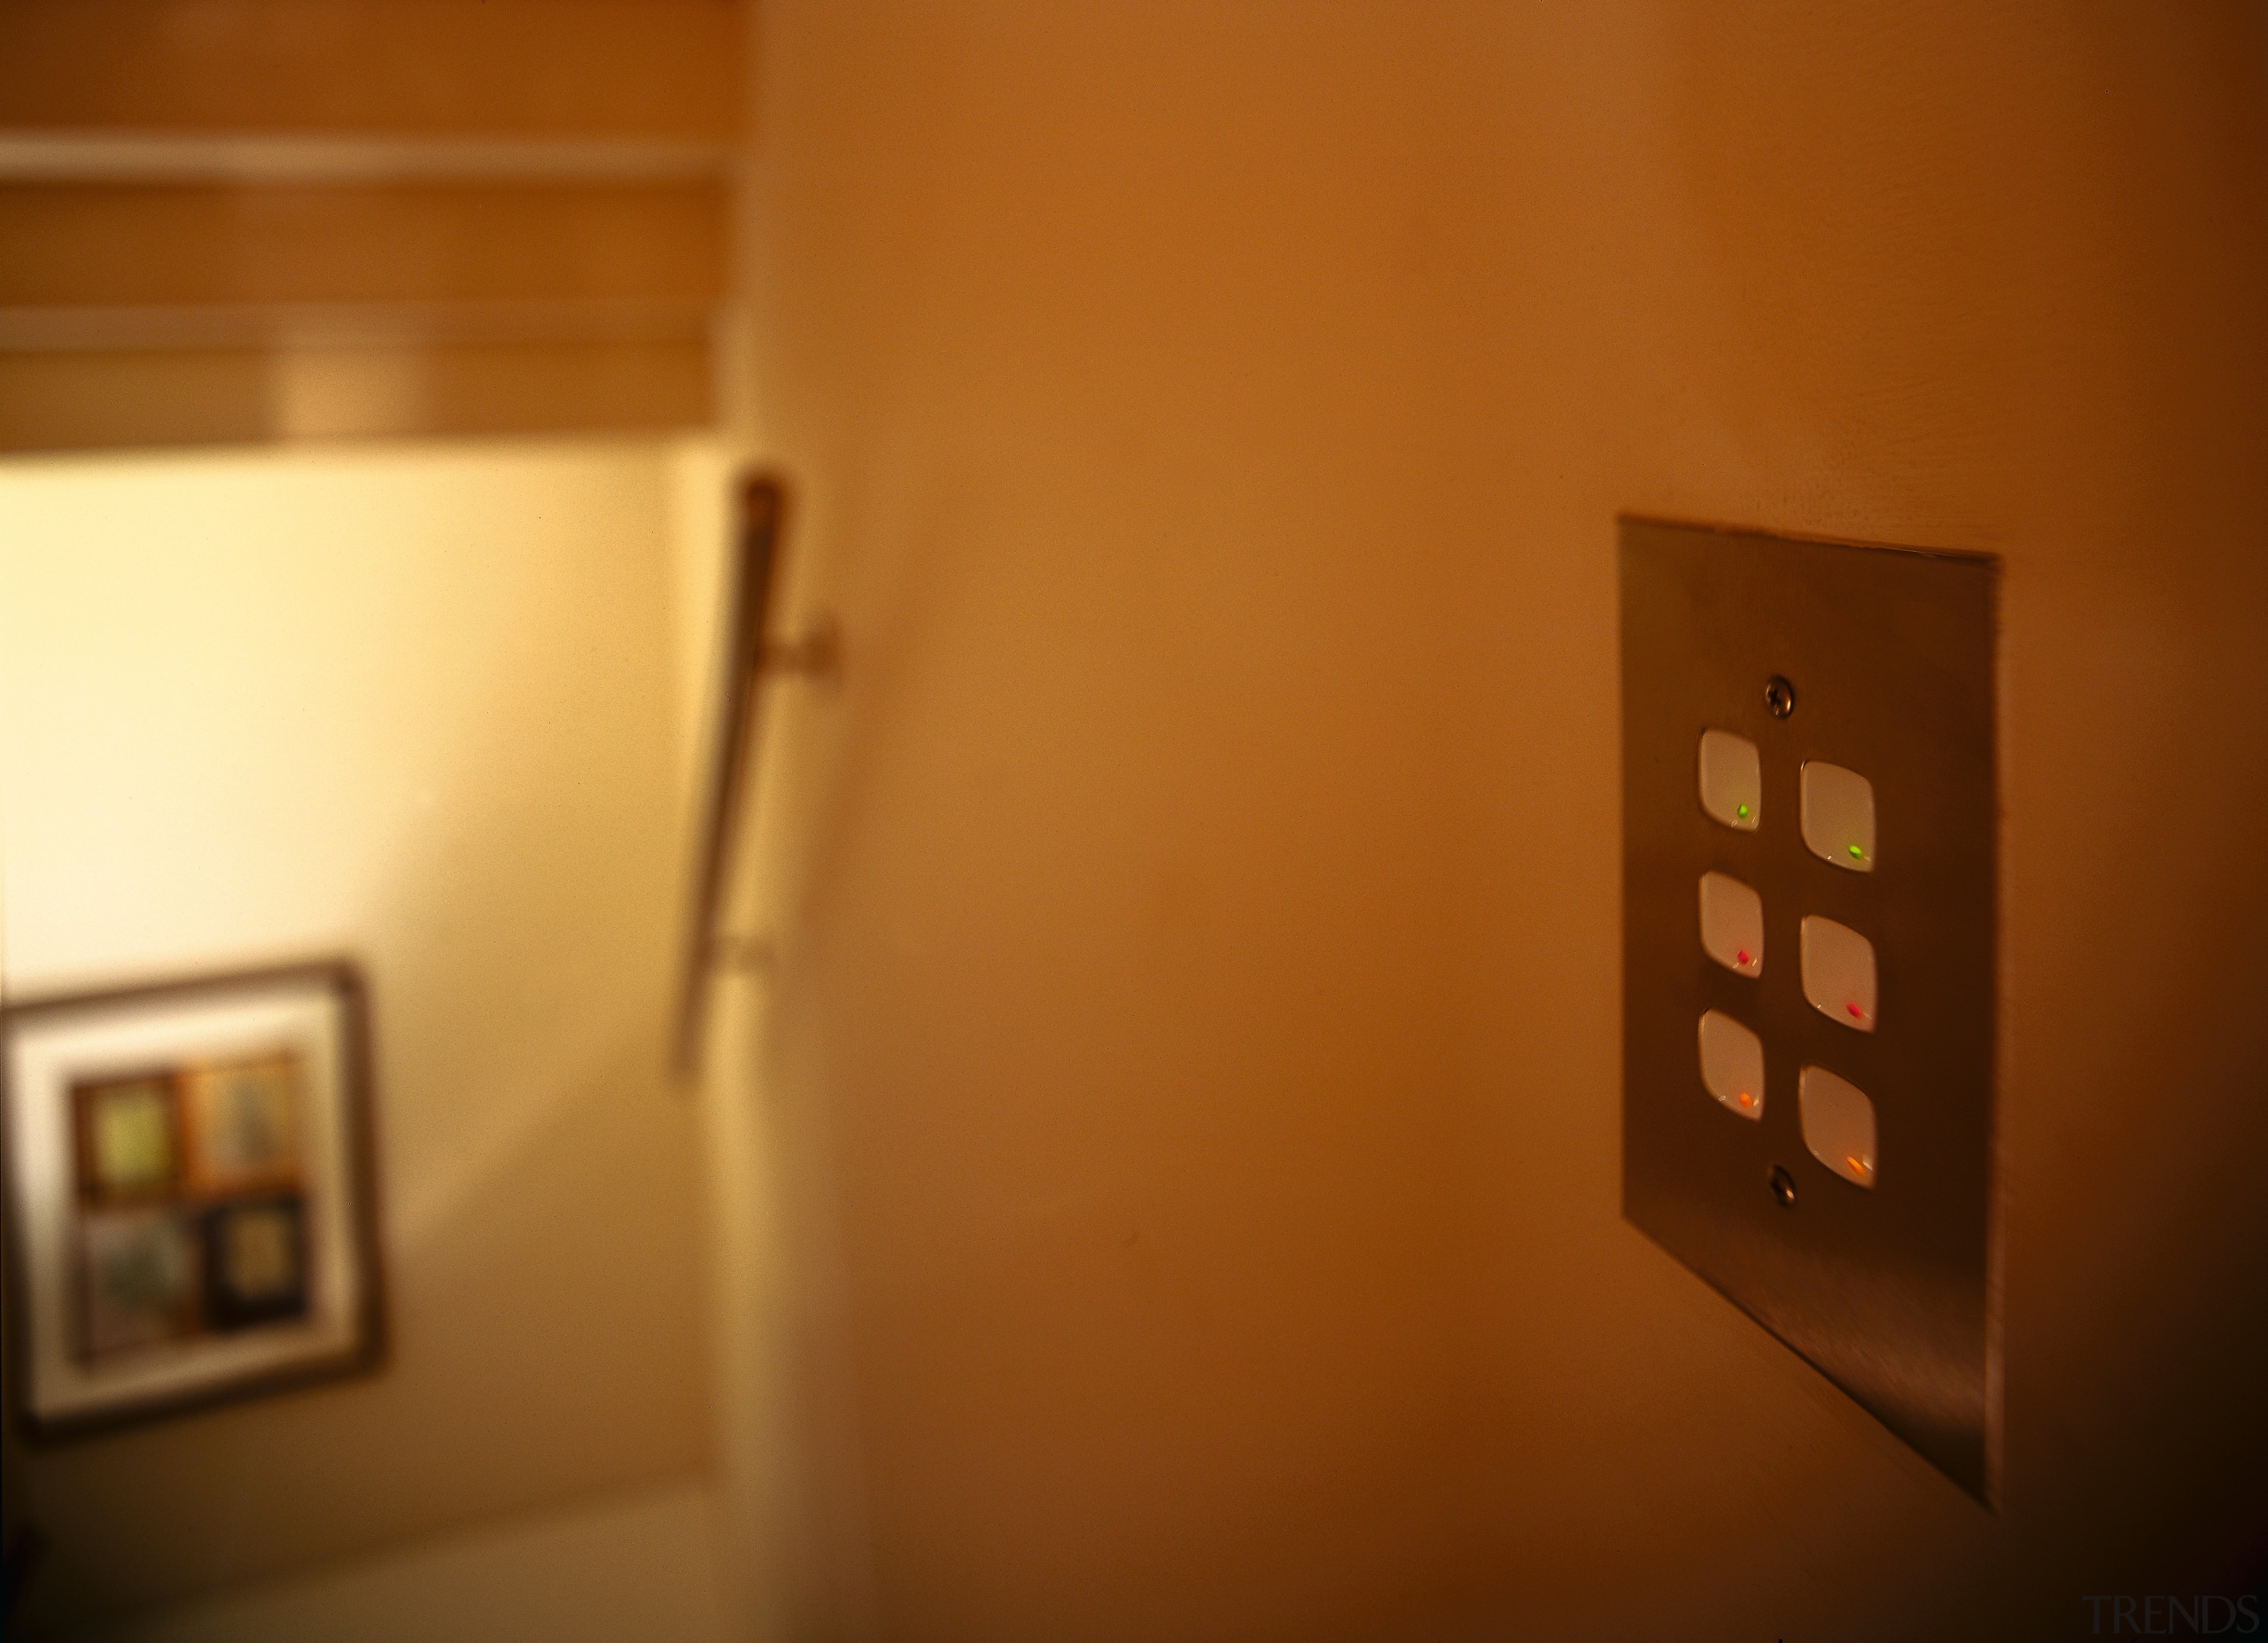 A view of the keypad used to control home, house, light, light fixture, lighting, room, tourist attraction, wood, brown